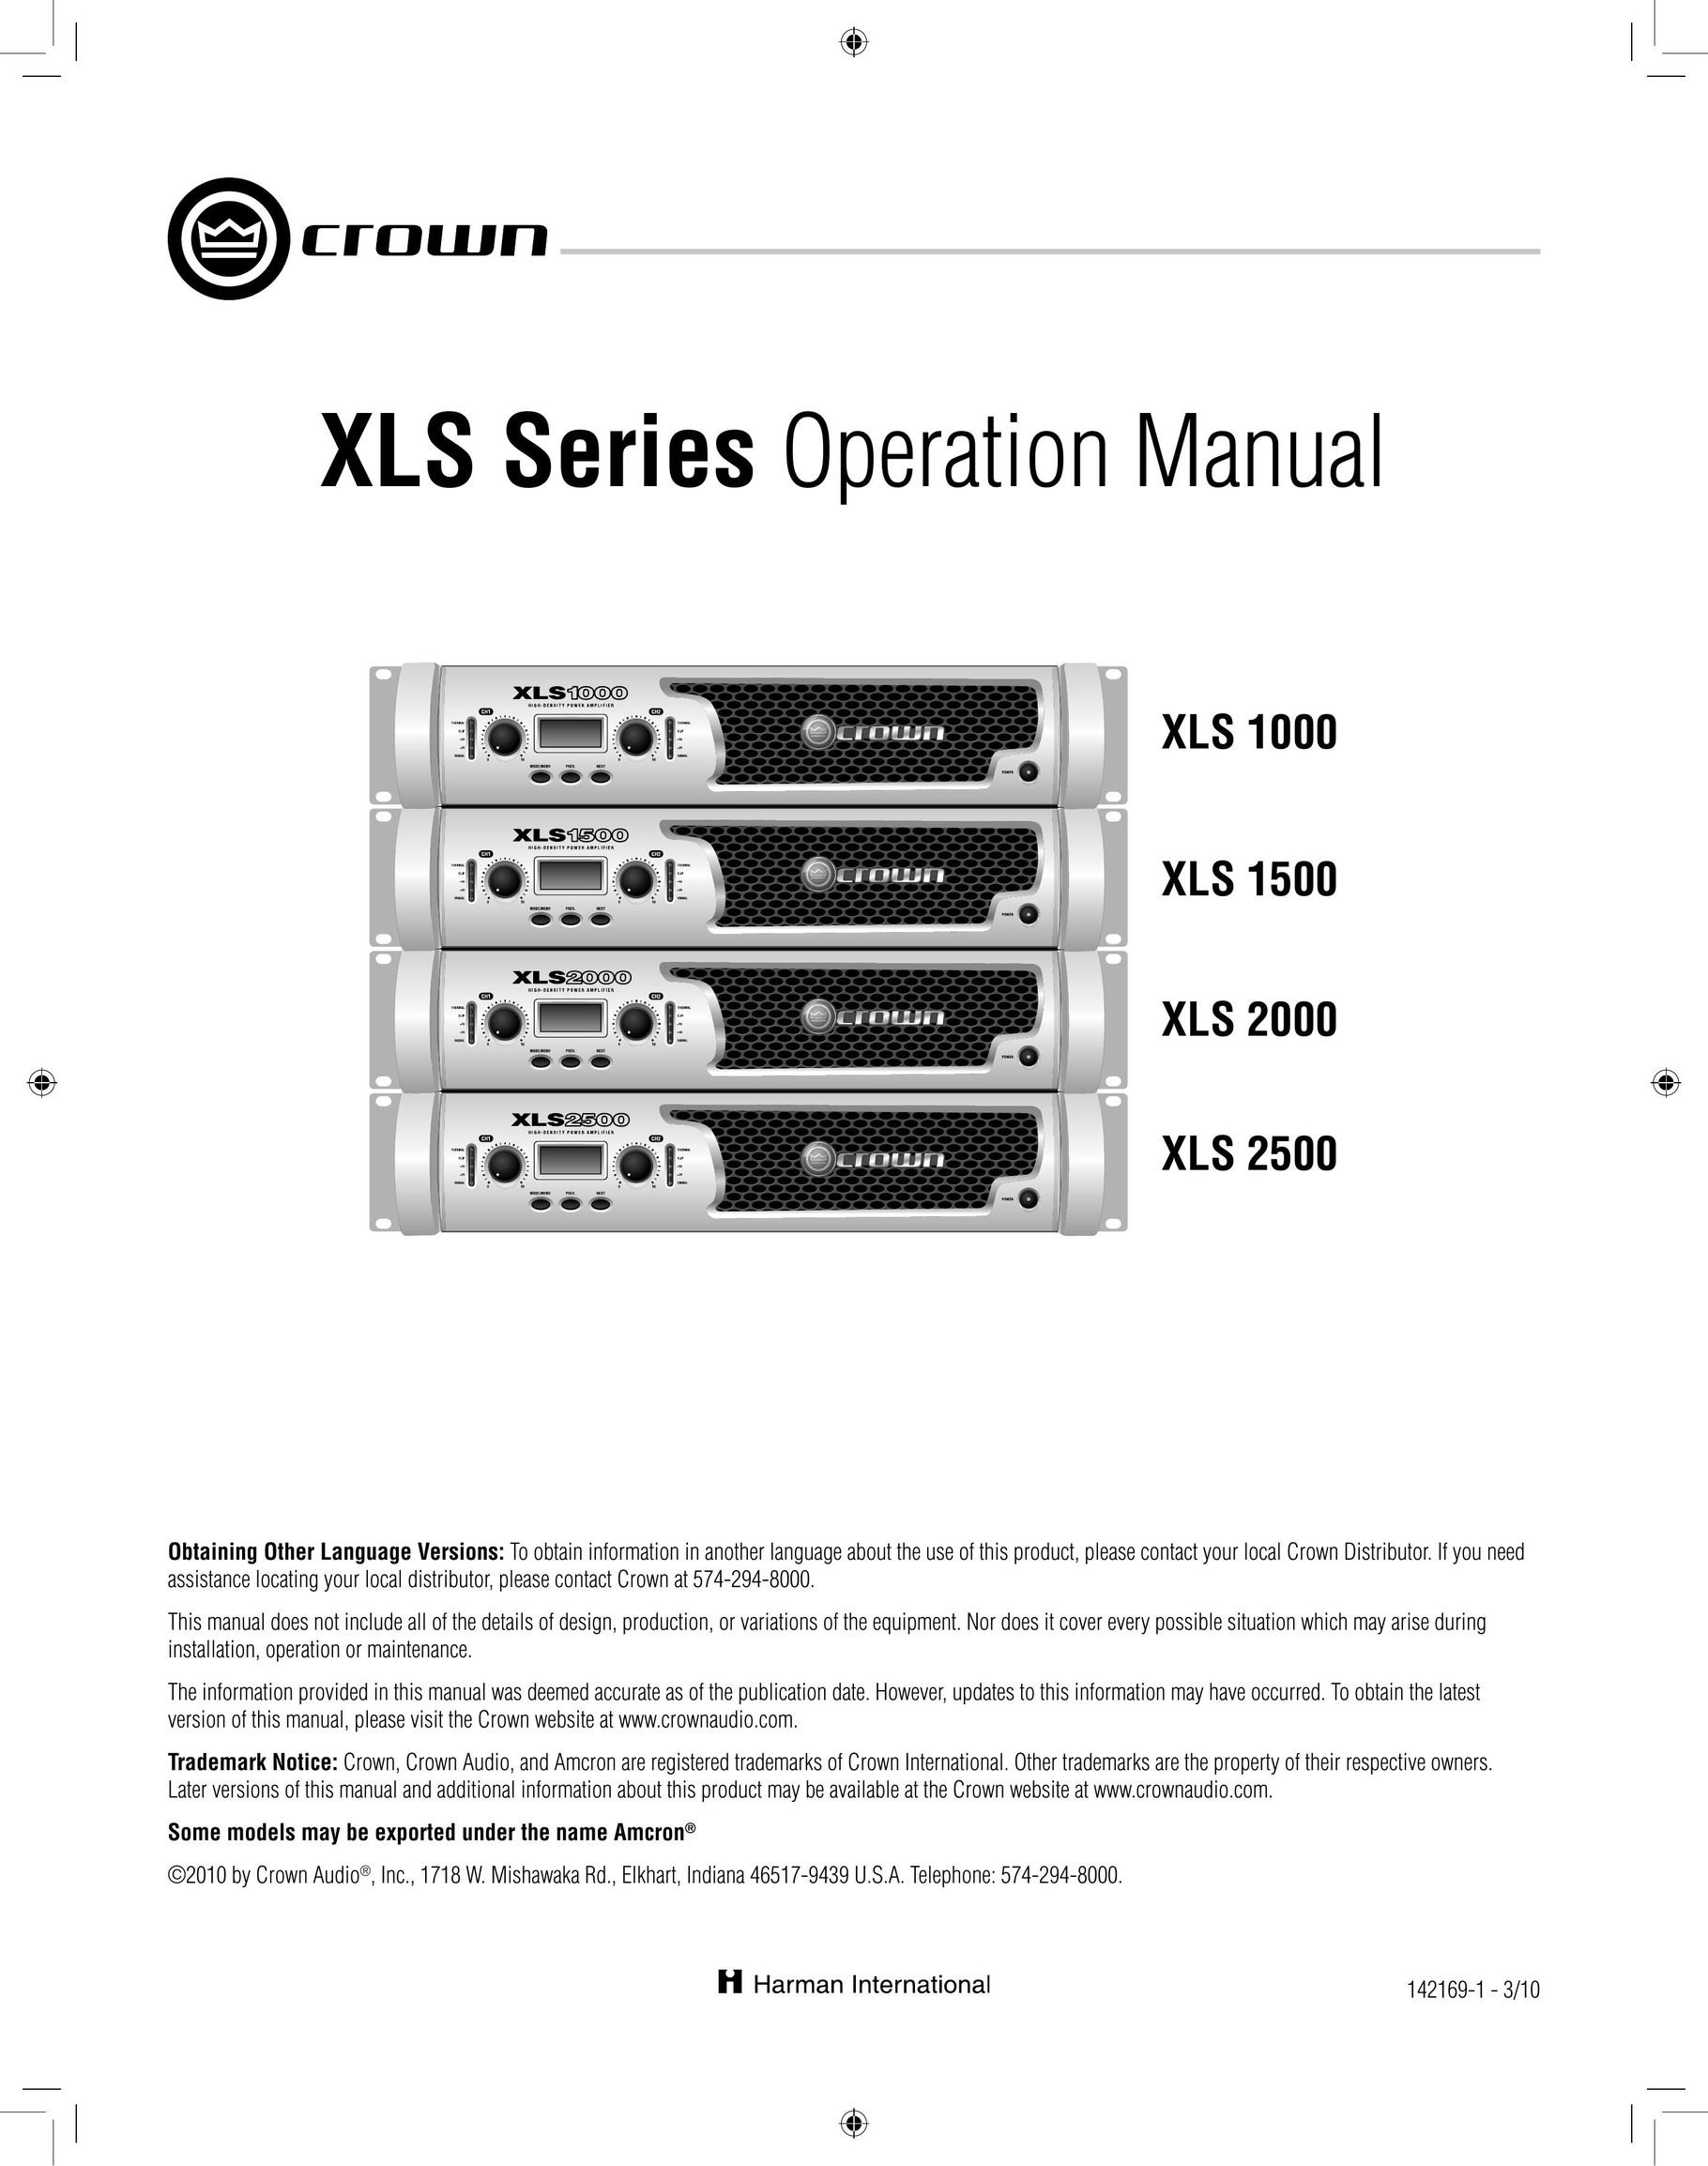 Crown XLS 1000 Stereo Amplifier User Manual